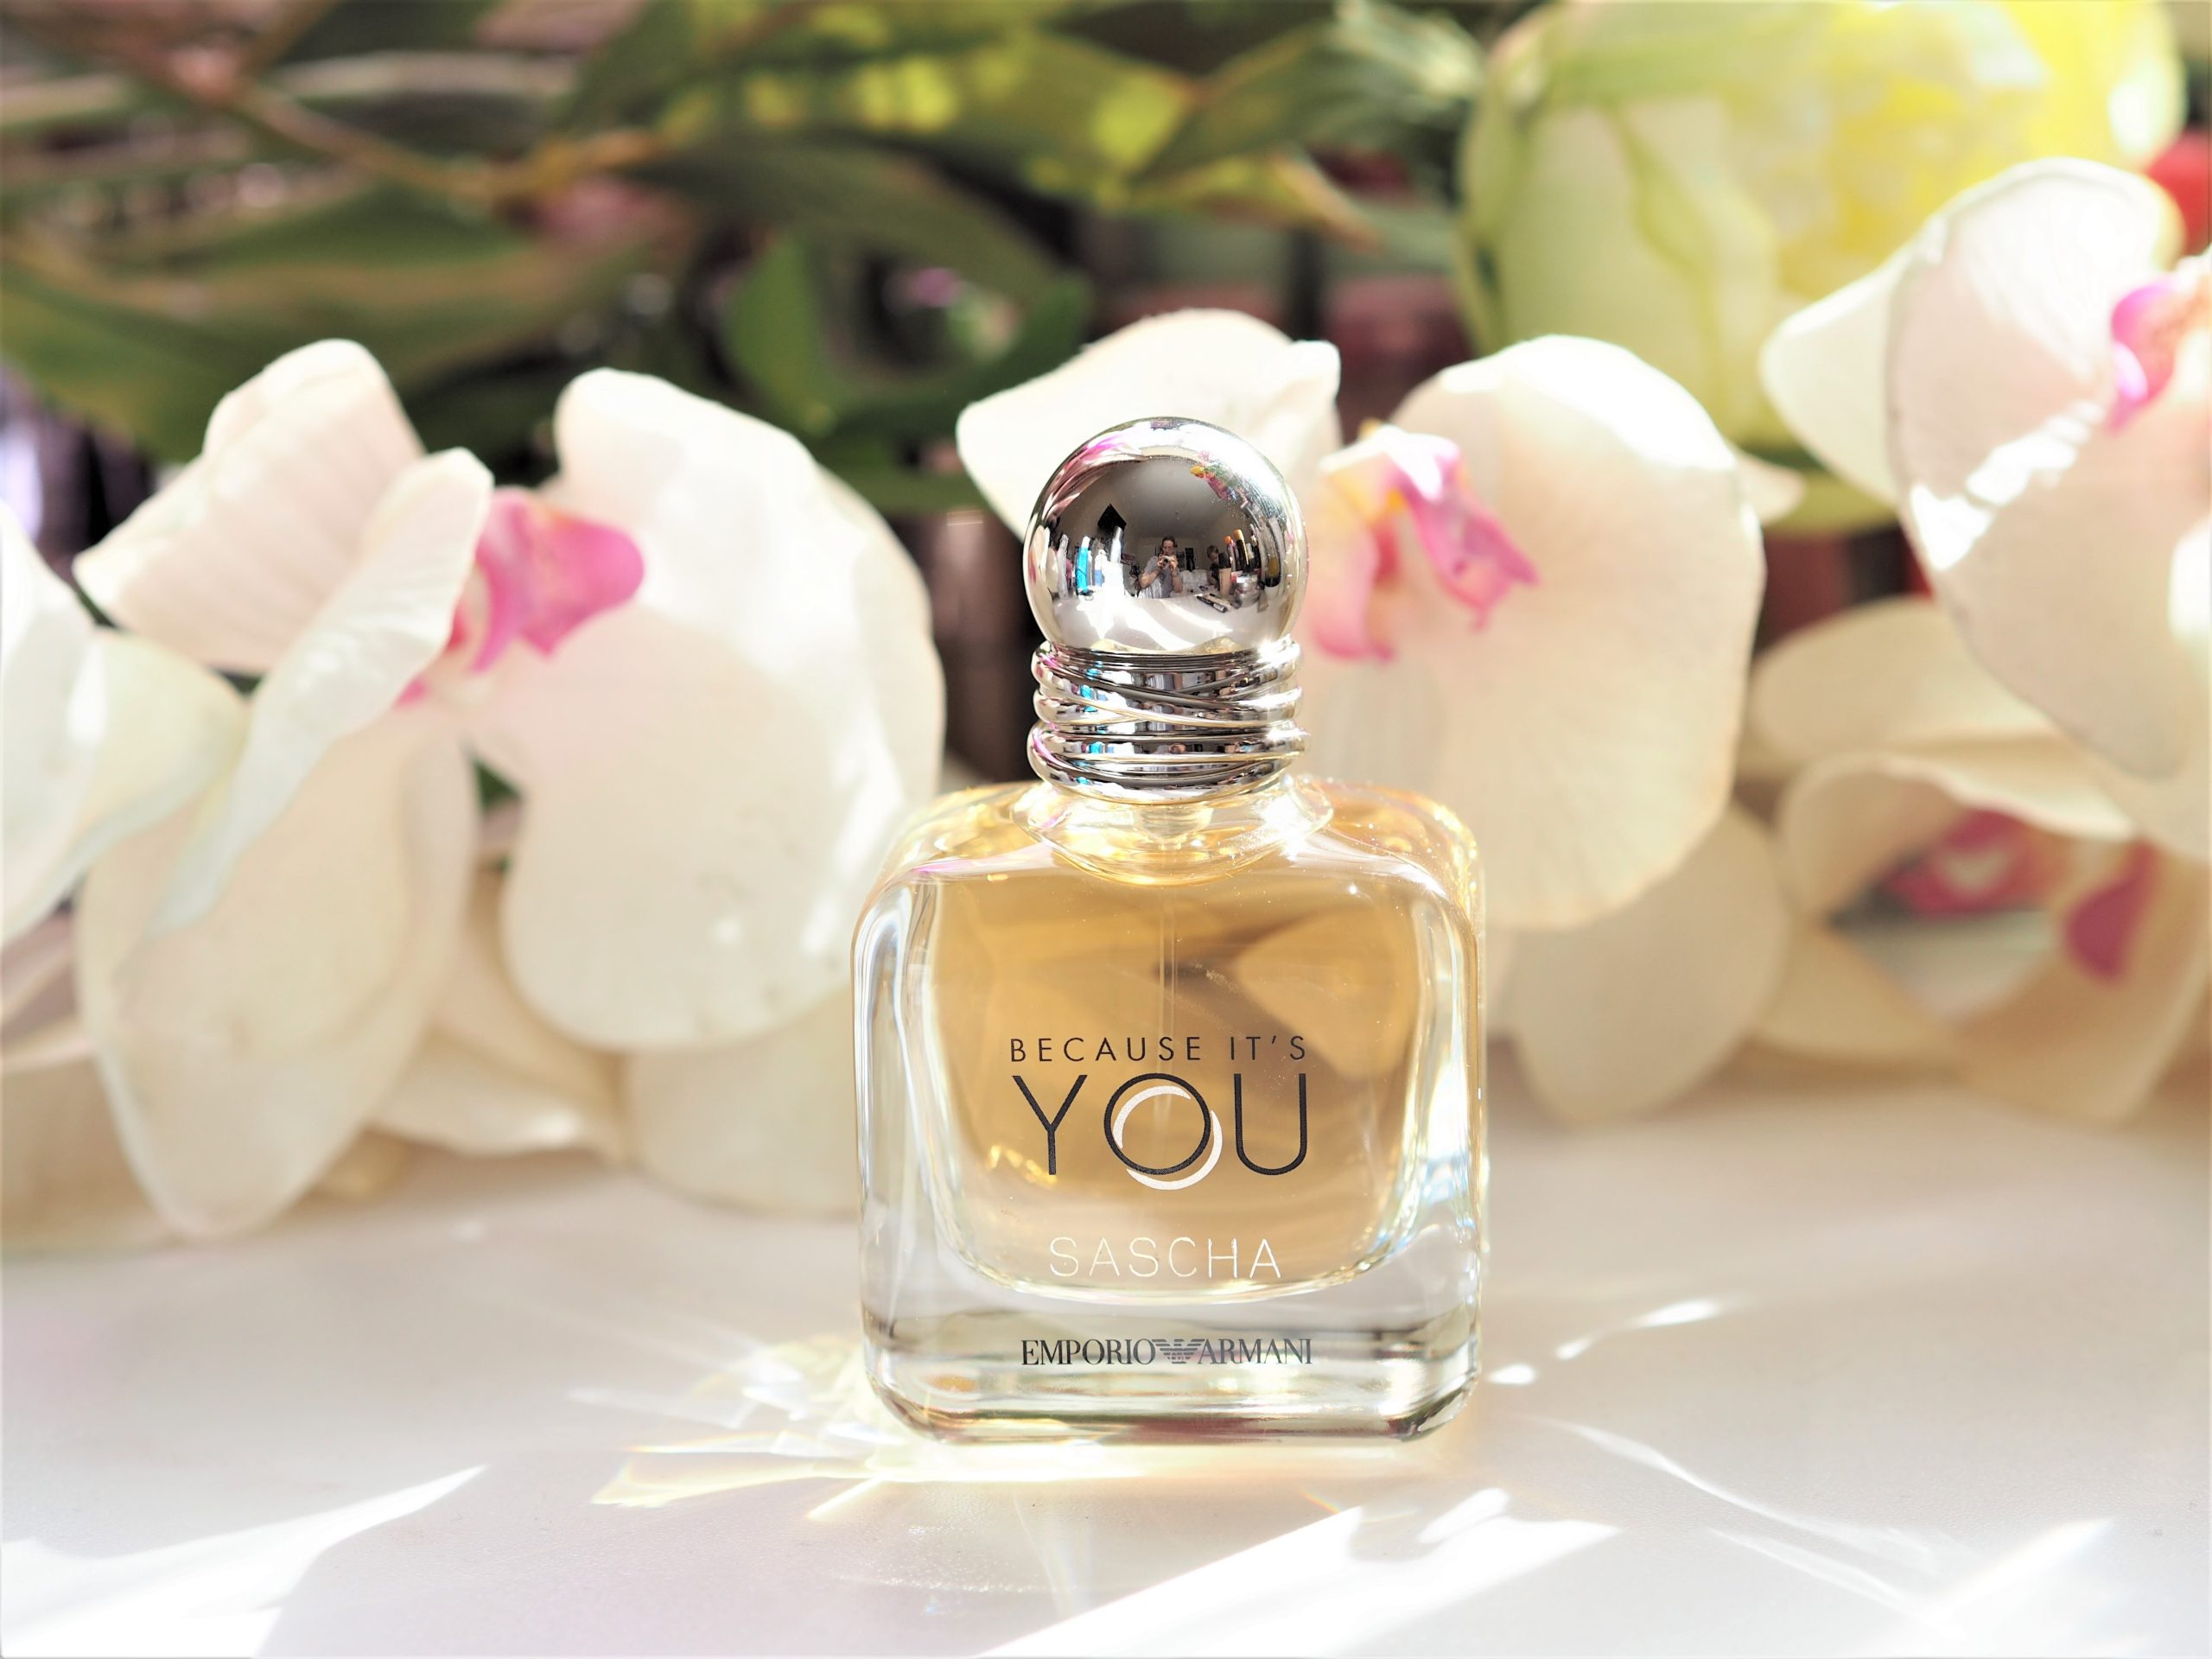 Emporio Armani Because It's You Review - Beauty Geek UK